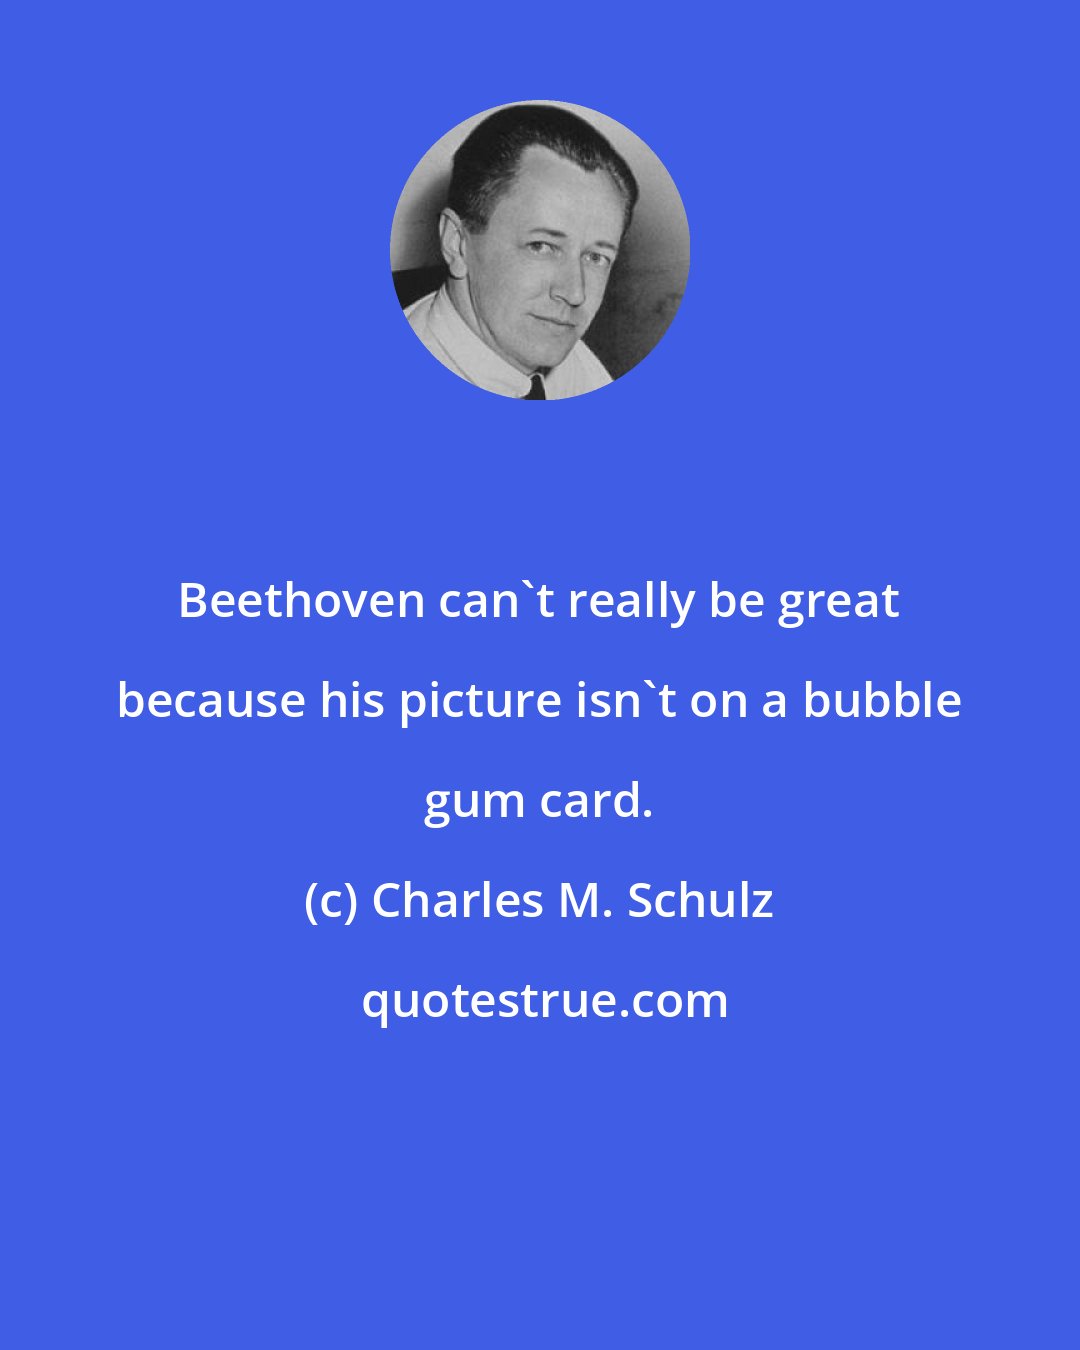 Charles M. Schulz: Beethoven can't really be great because his picture isn't on a bubble gum card.